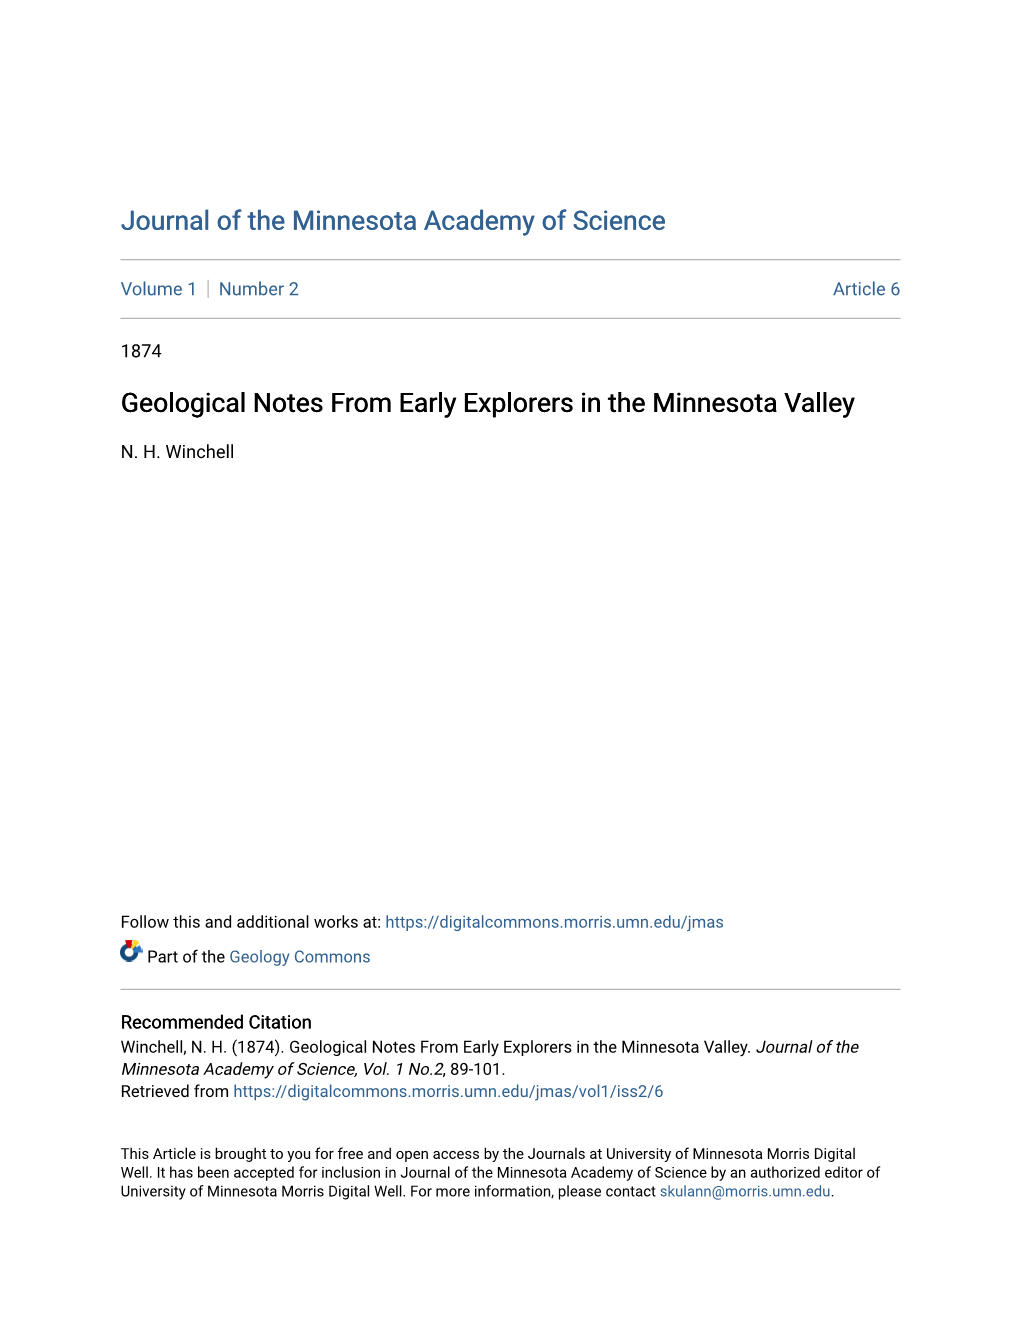 Geological Notes from Early Explorers in the Minnesota Valley